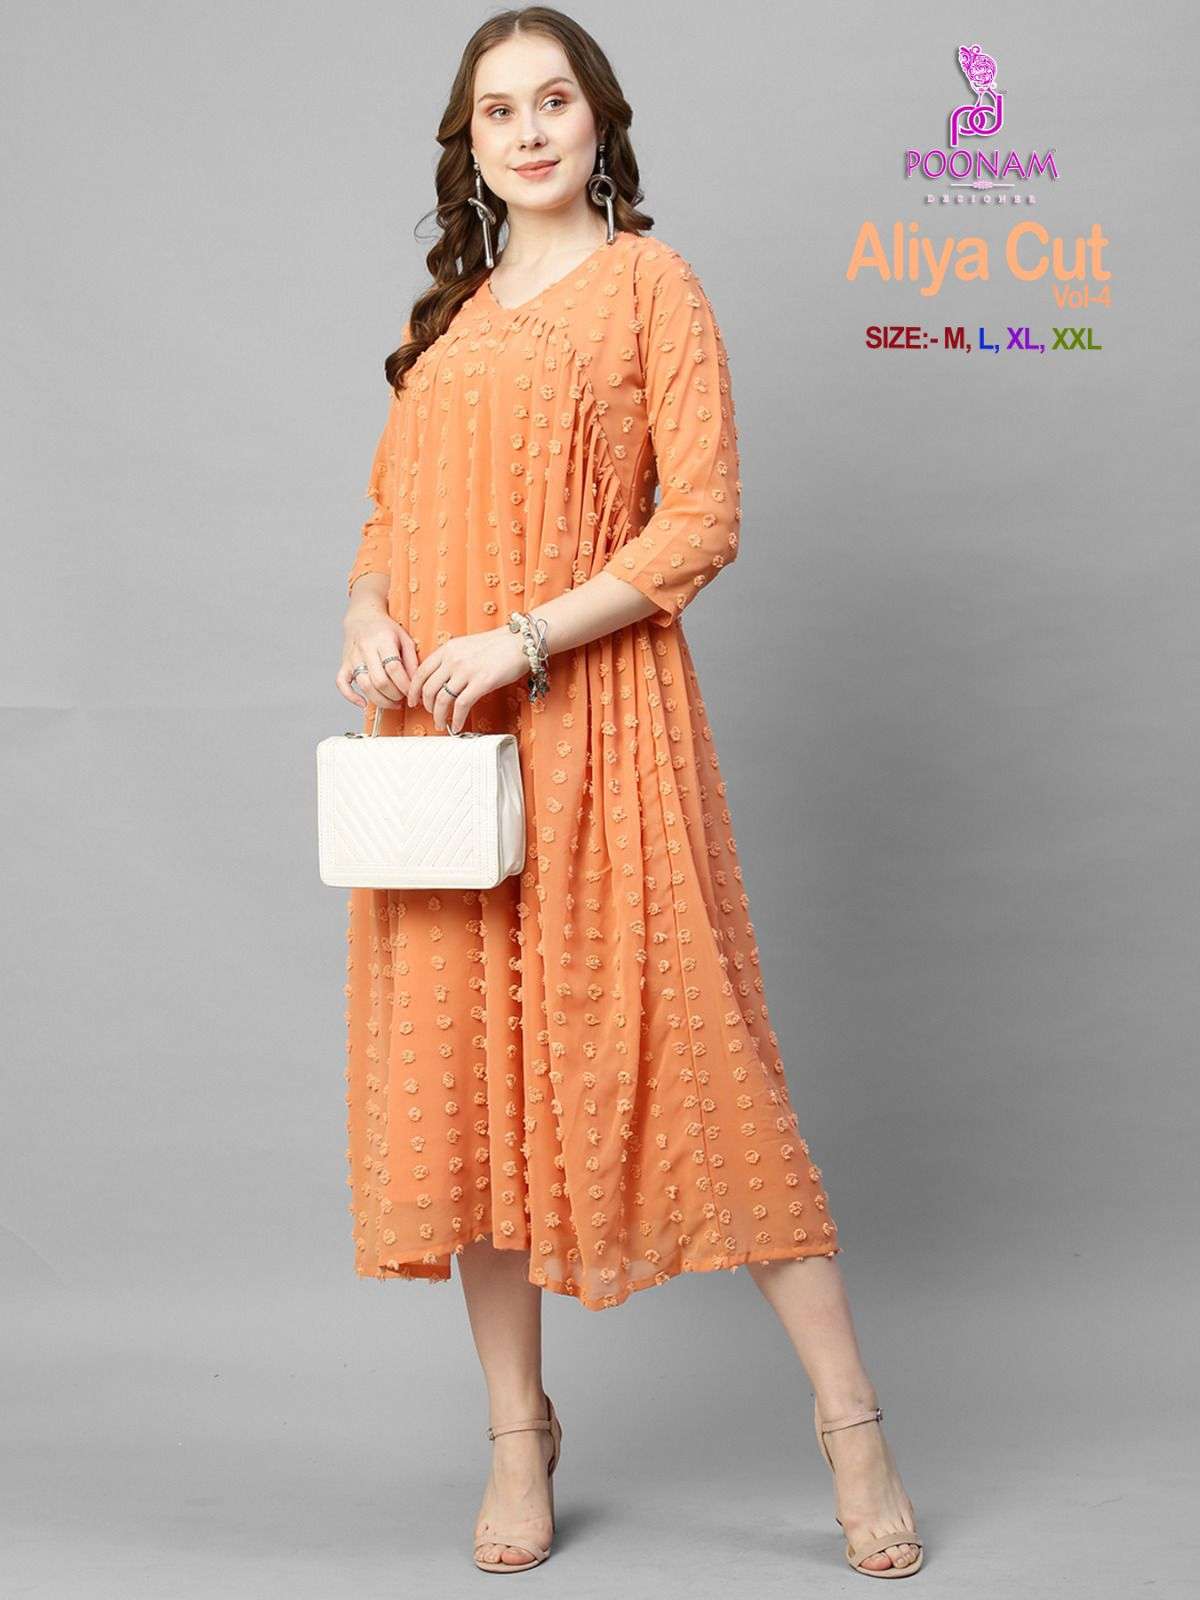 HUGE** Party wear dresses from Myntra starting 549. 